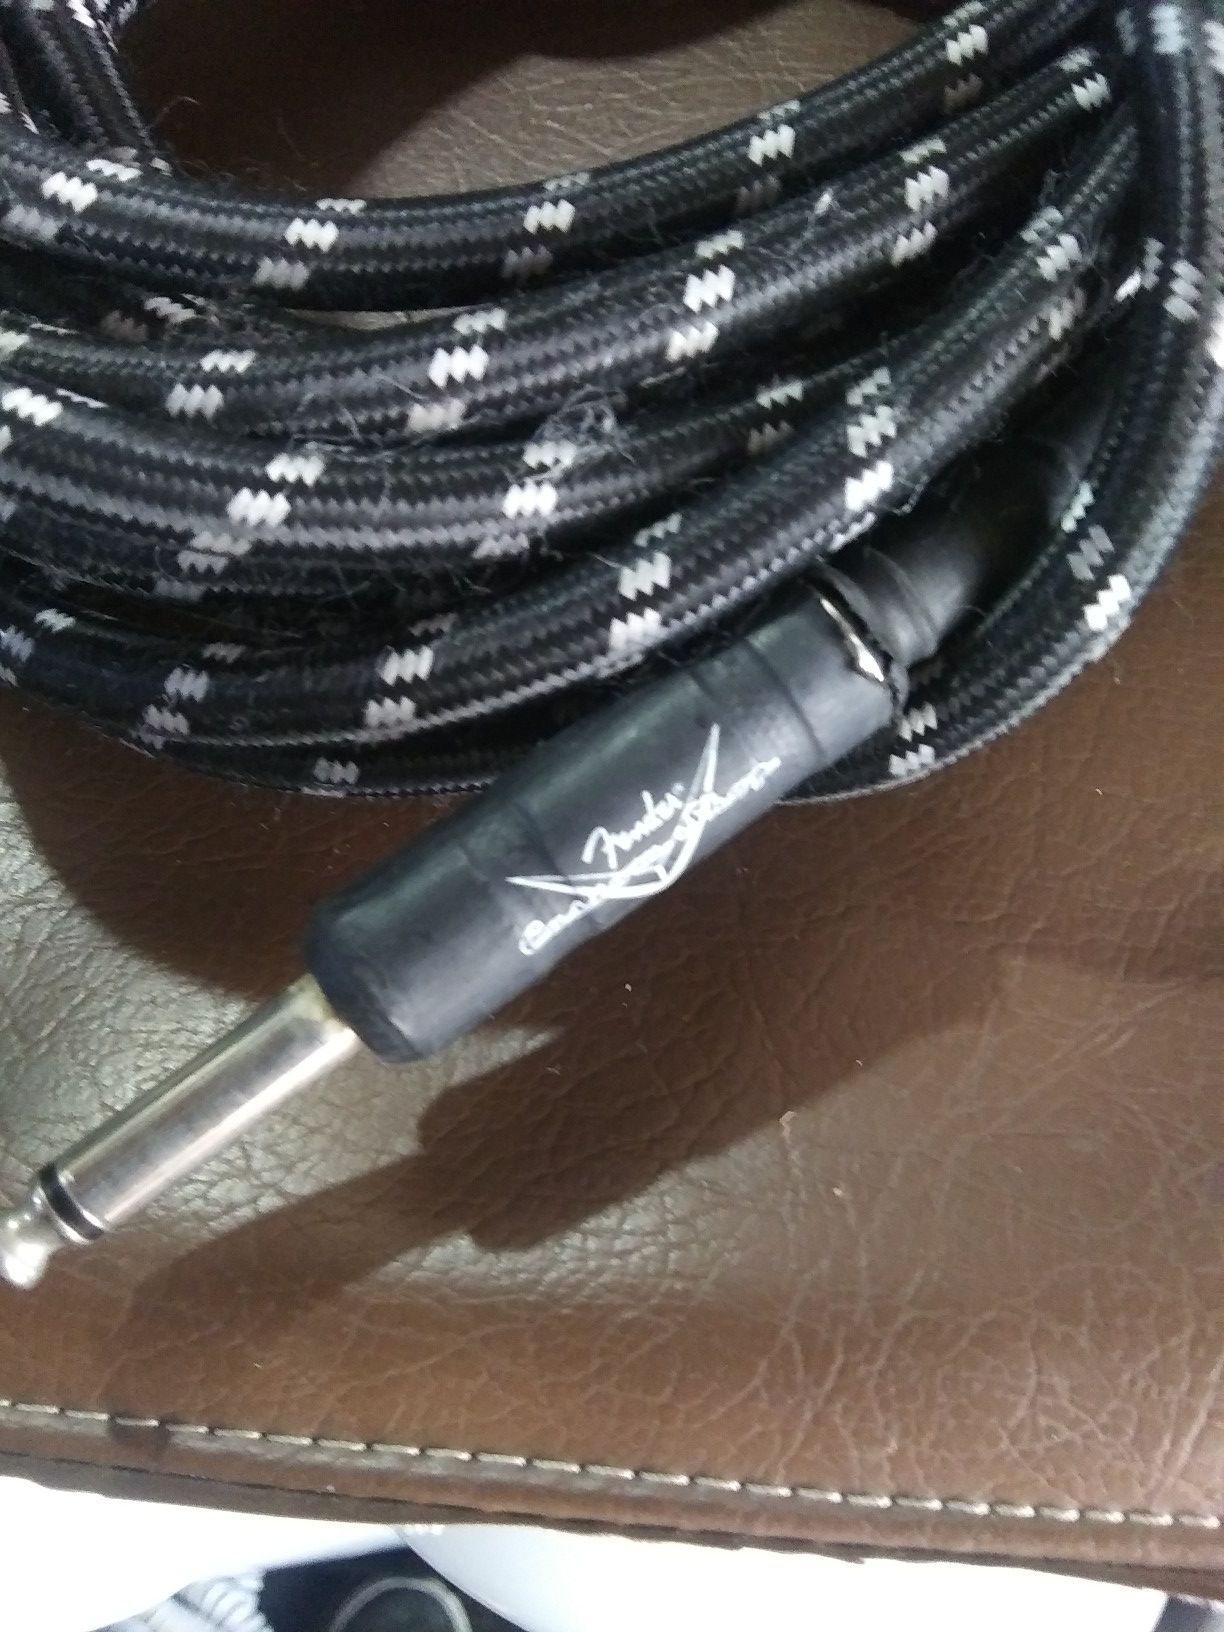 Fender 18" Instrument Cable